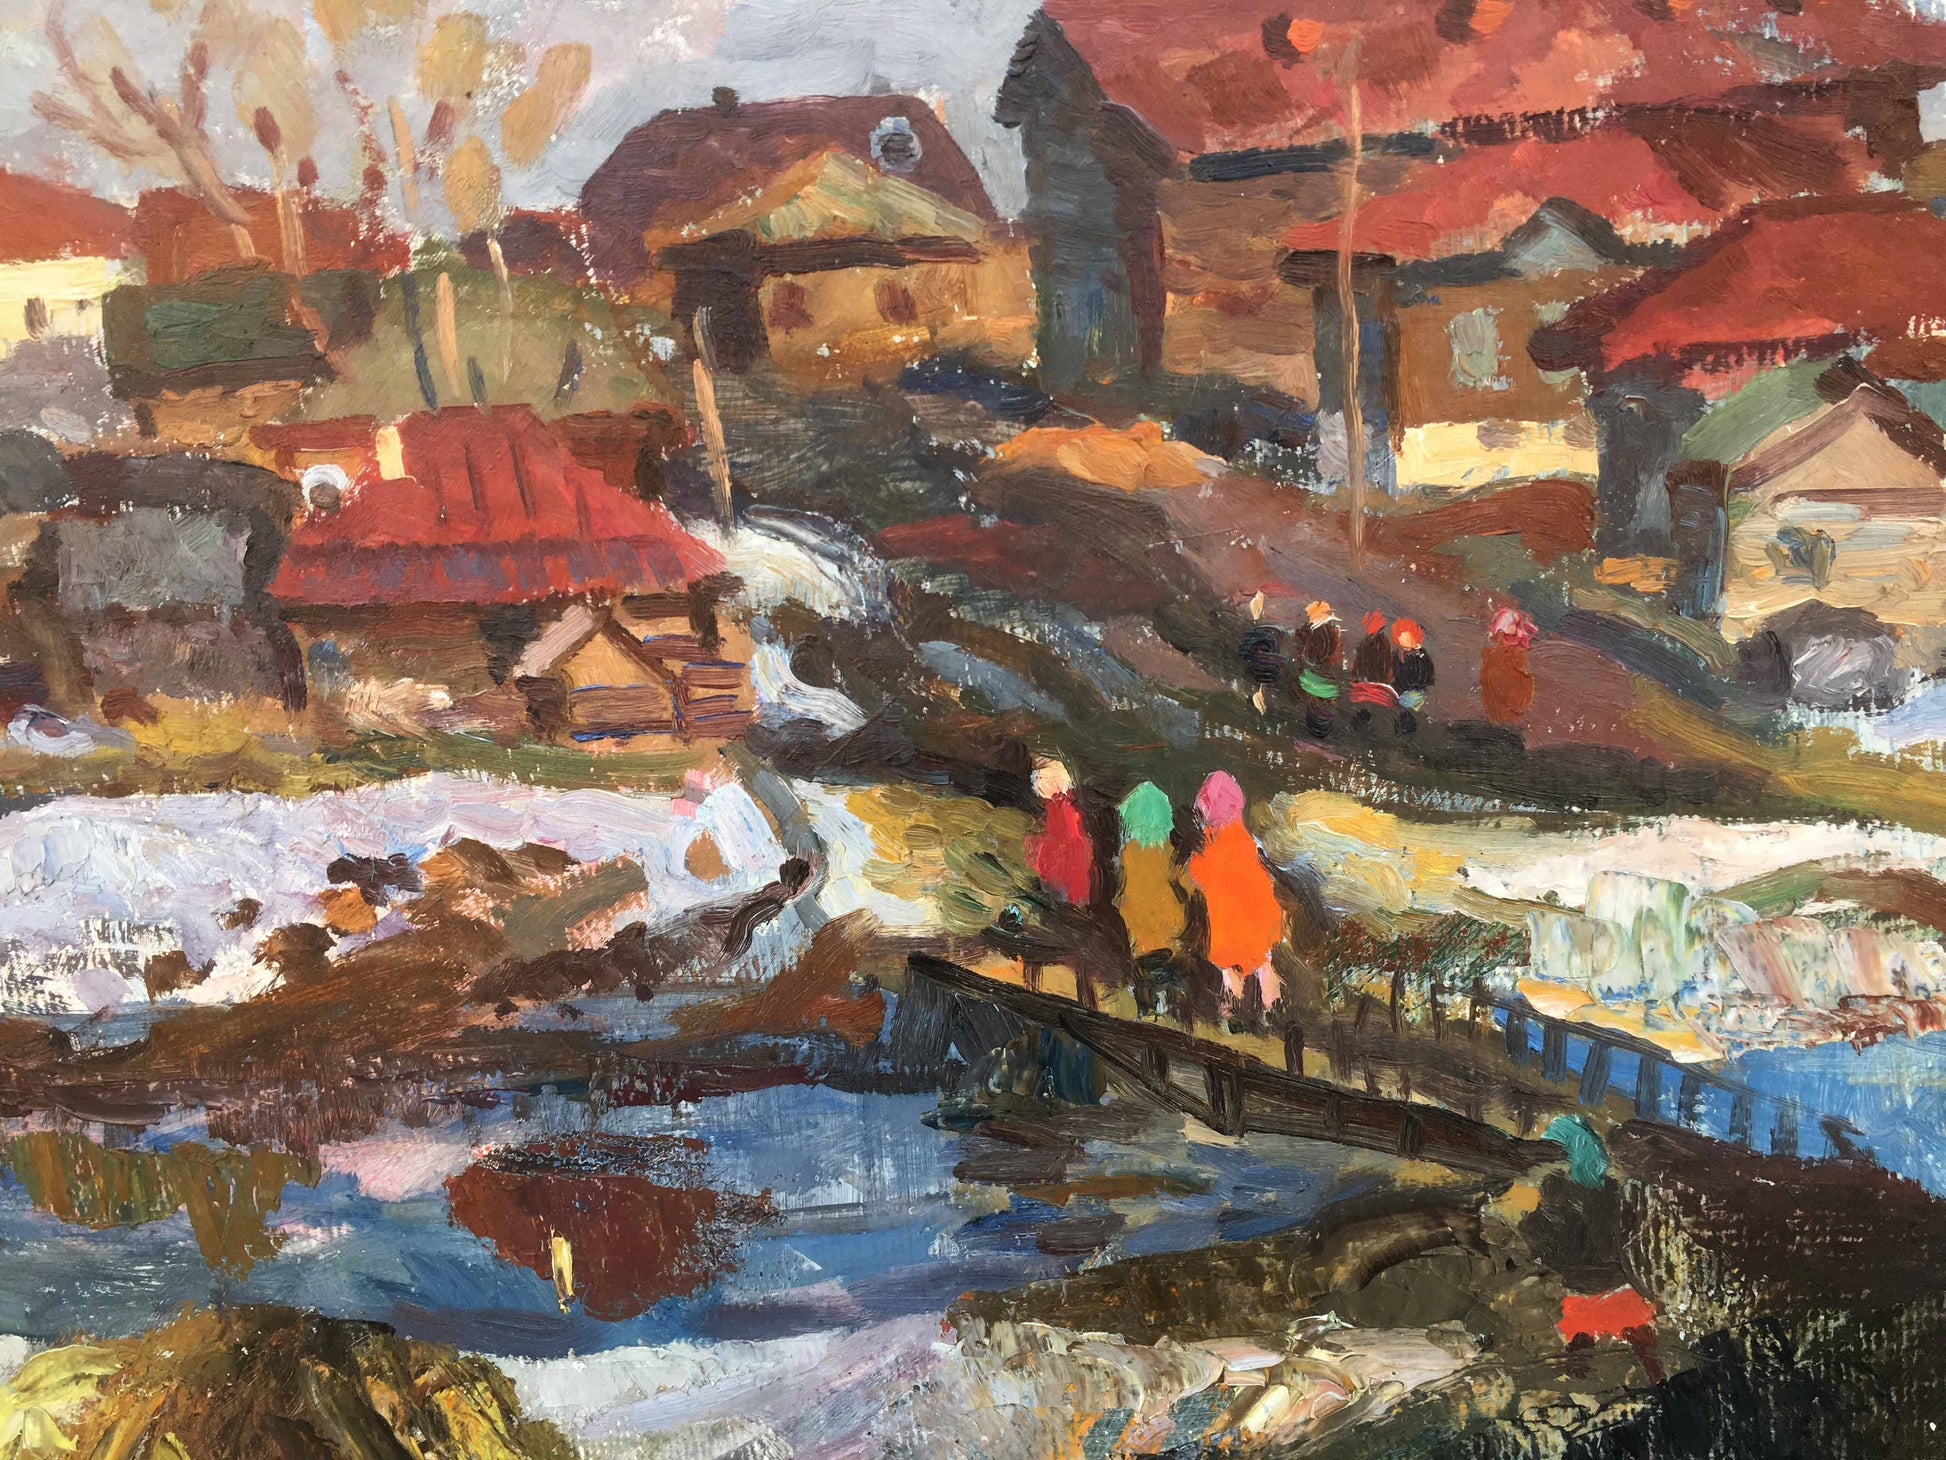 The oil painting by Pavel Leontievich Porotnikov features a village in April